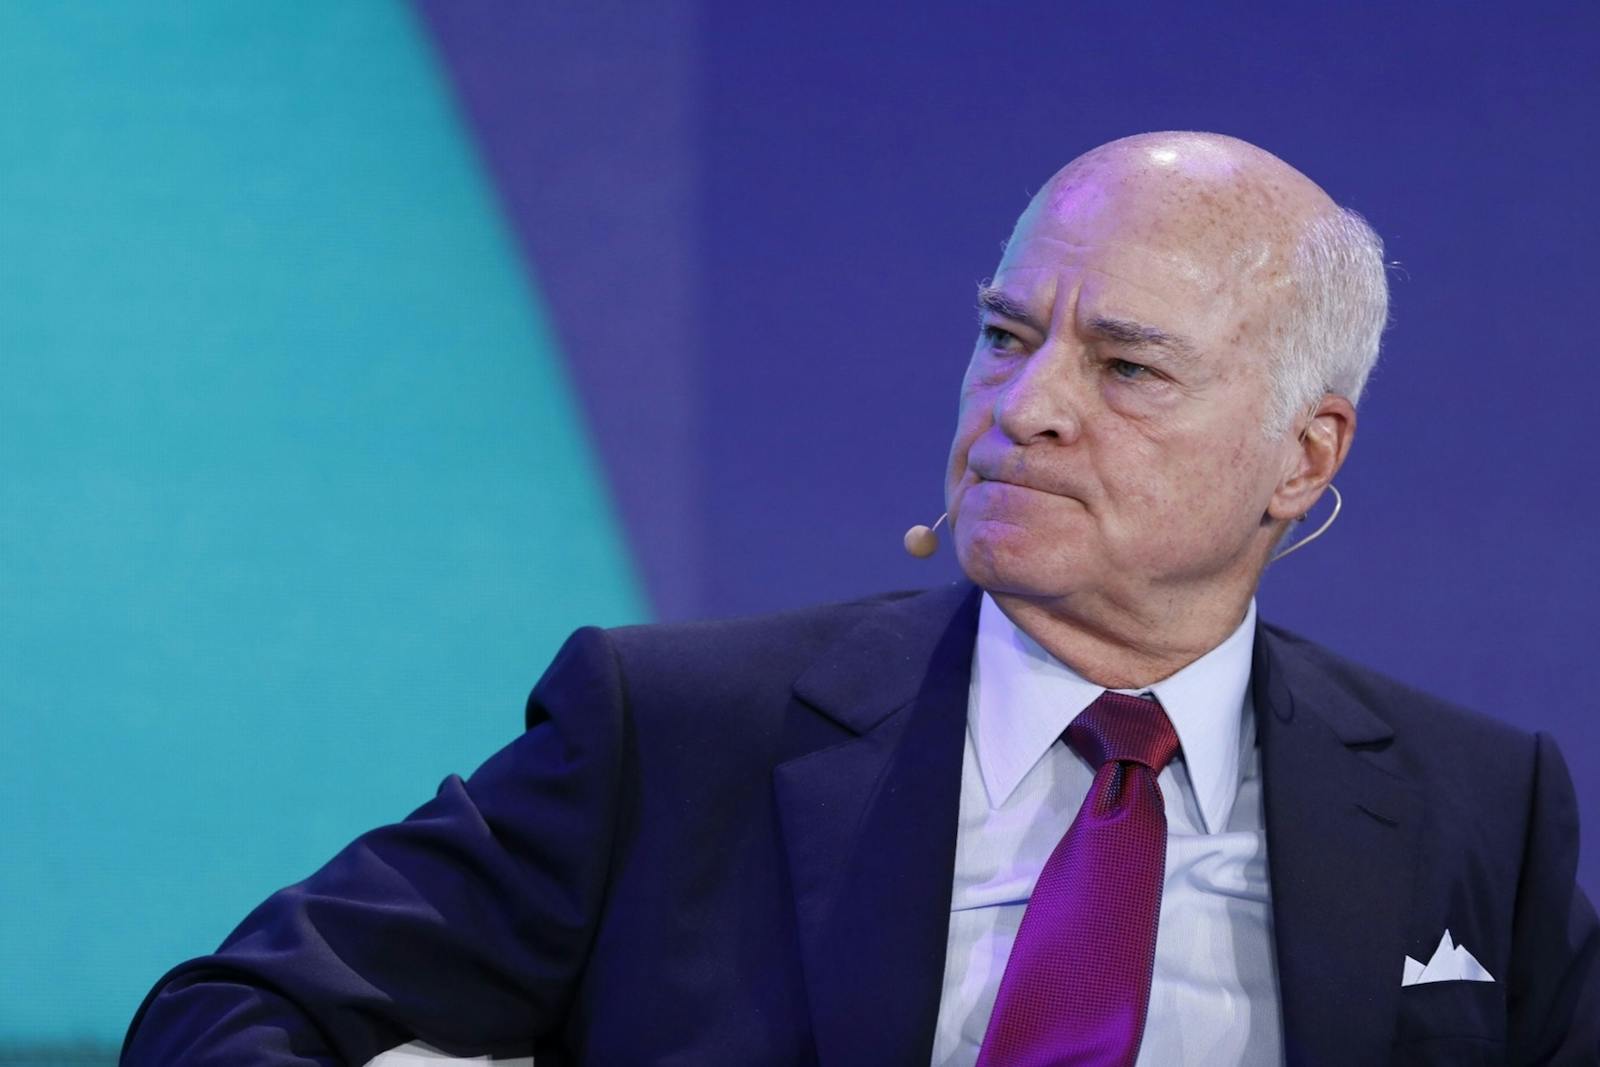 KKR co-founder and co-executive chair Henry Kravis. Photo: Bloomberg.